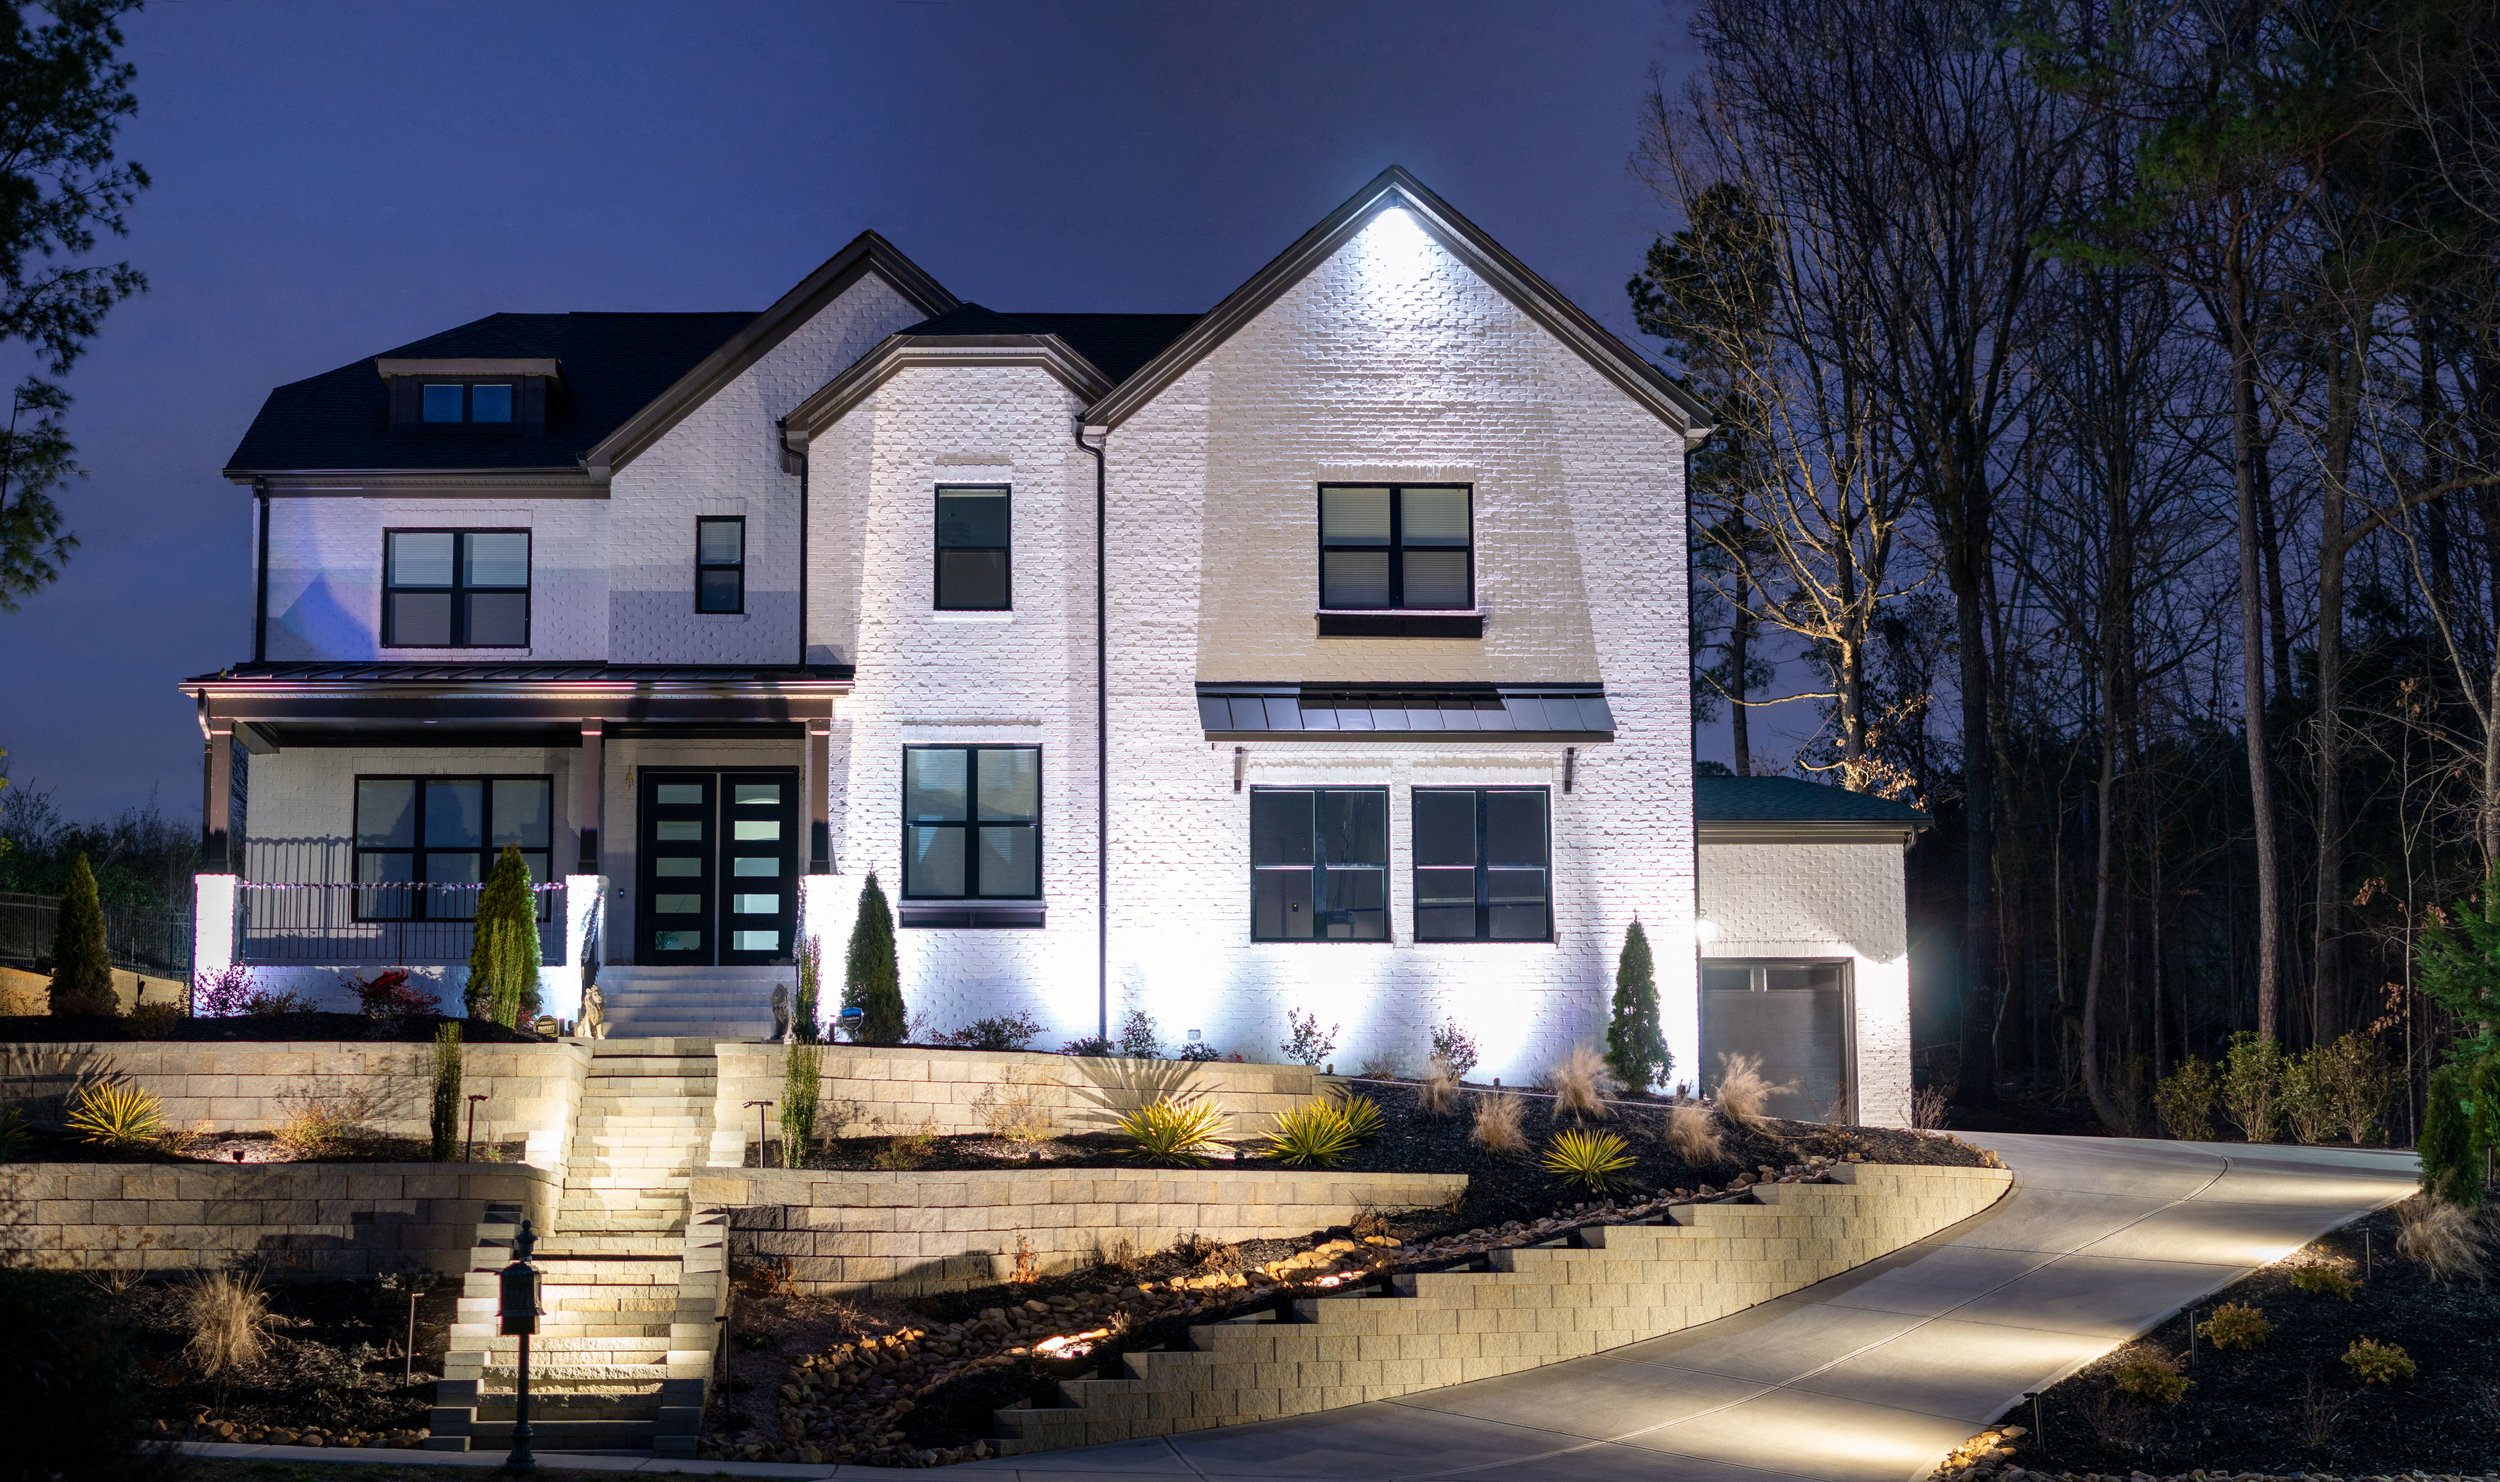  White brick home with dark trim illuminated with architectural up lights and downlights. Front yard is heavily landscaped with tiered retaining walls illuminated with soft landscape lighting. 